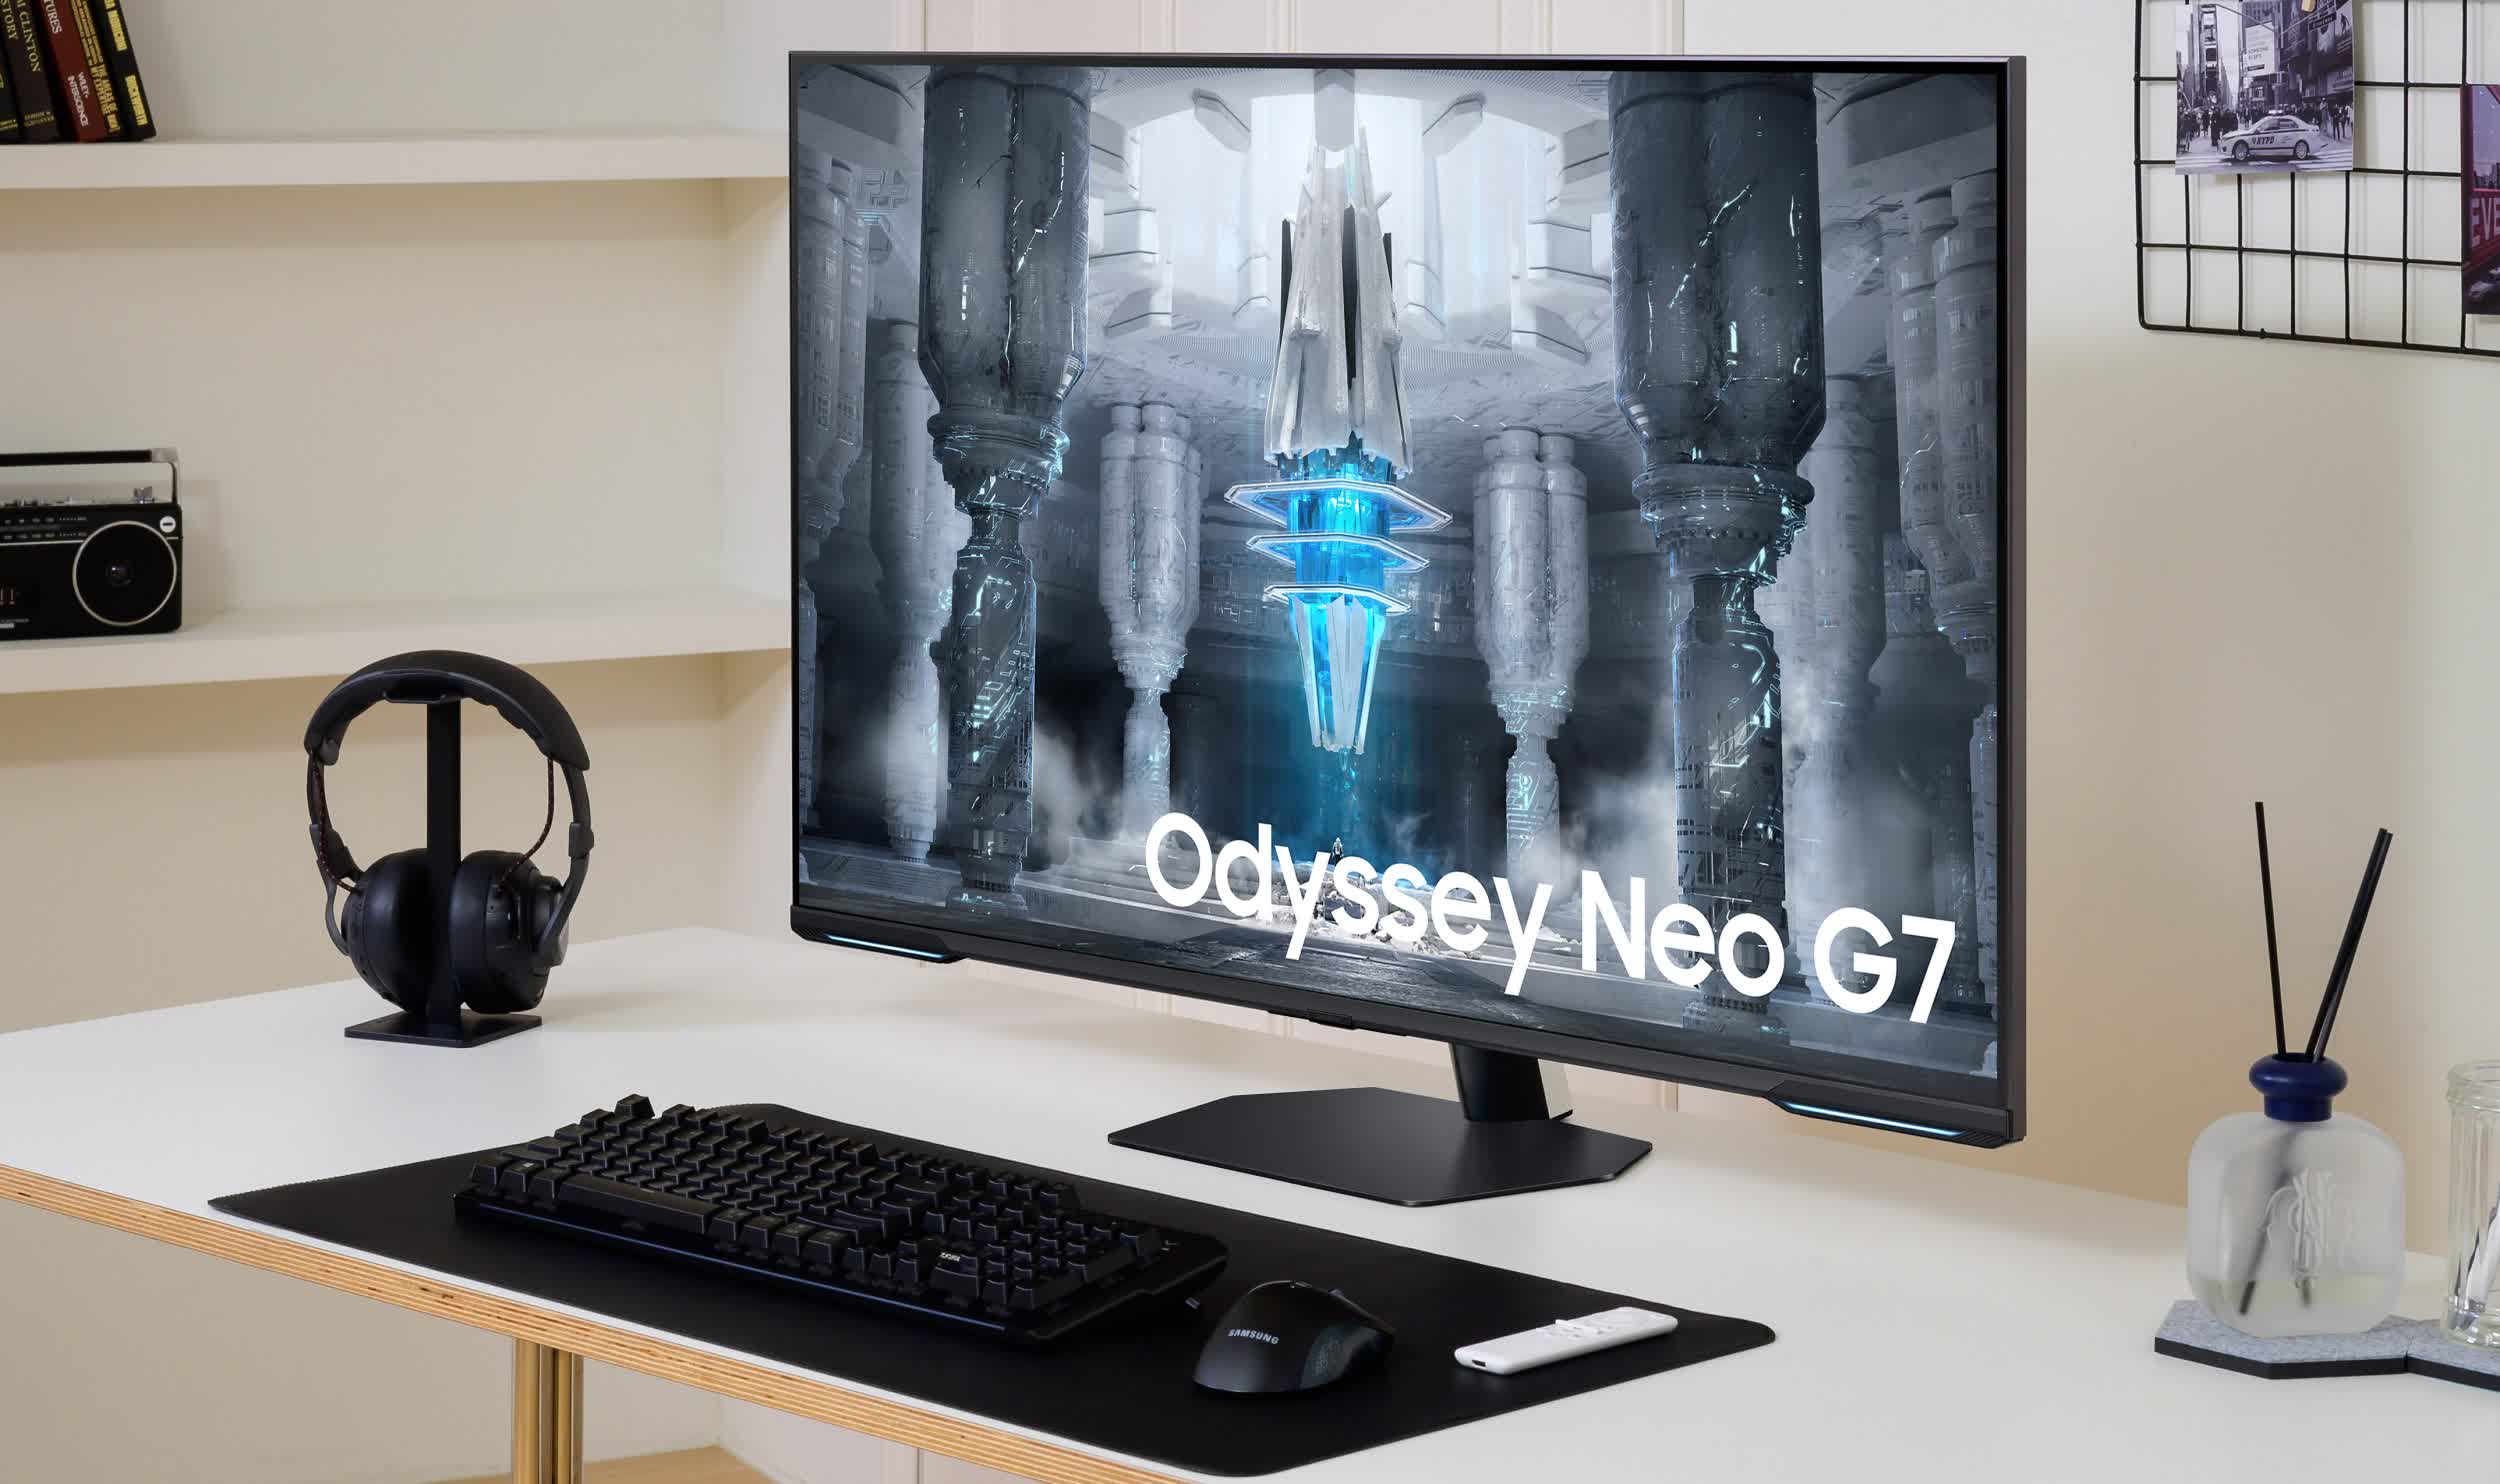 Samsung's 43-inch Odyssey Neo G7 gaming monitor goes on sale for under $1,000